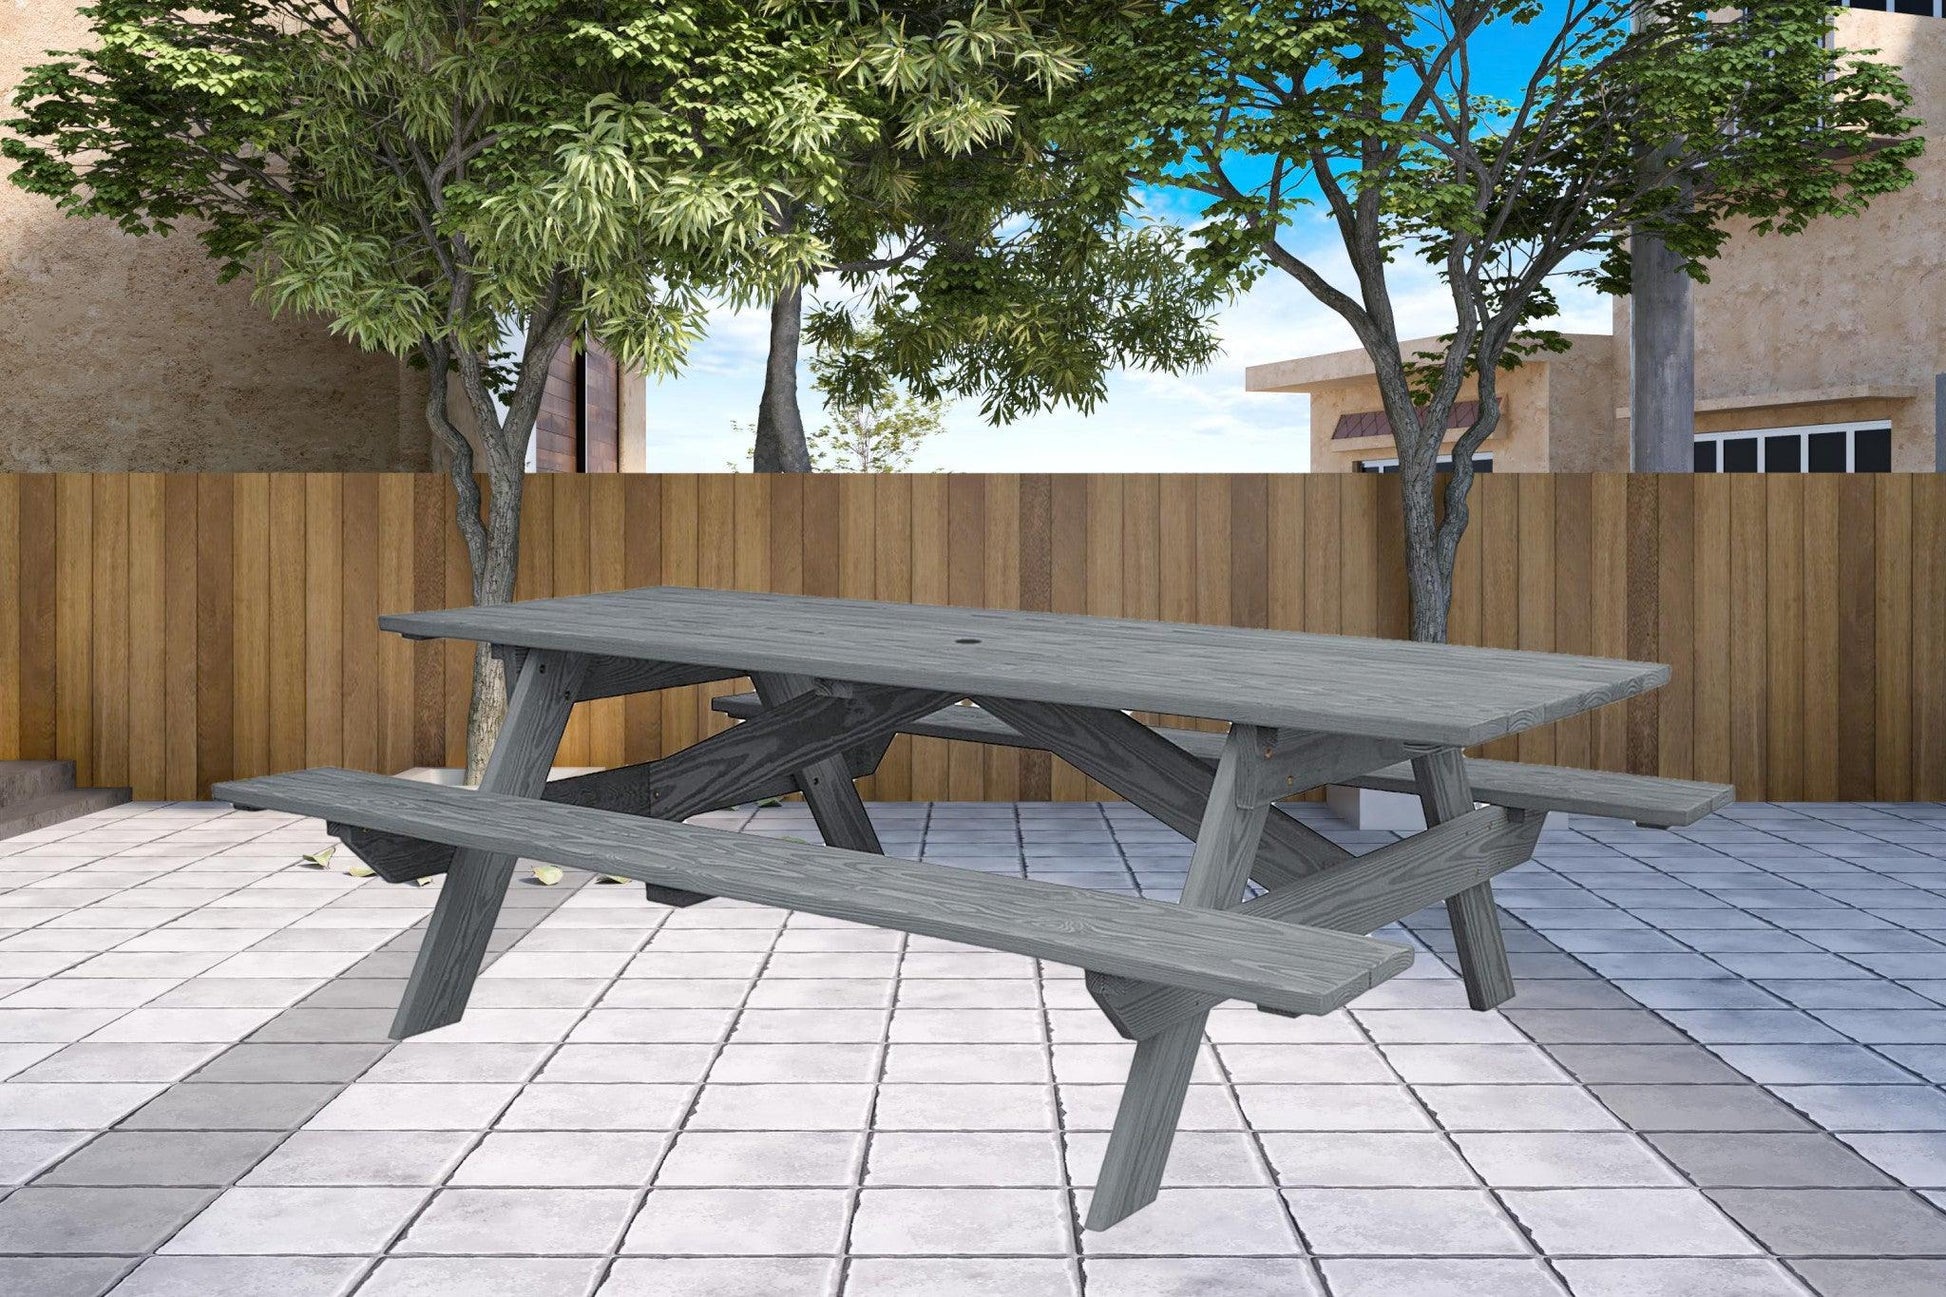 94" Gray Solid Wood Outdoor Picnic Table with Umbrella Hole - FurniFindUSA